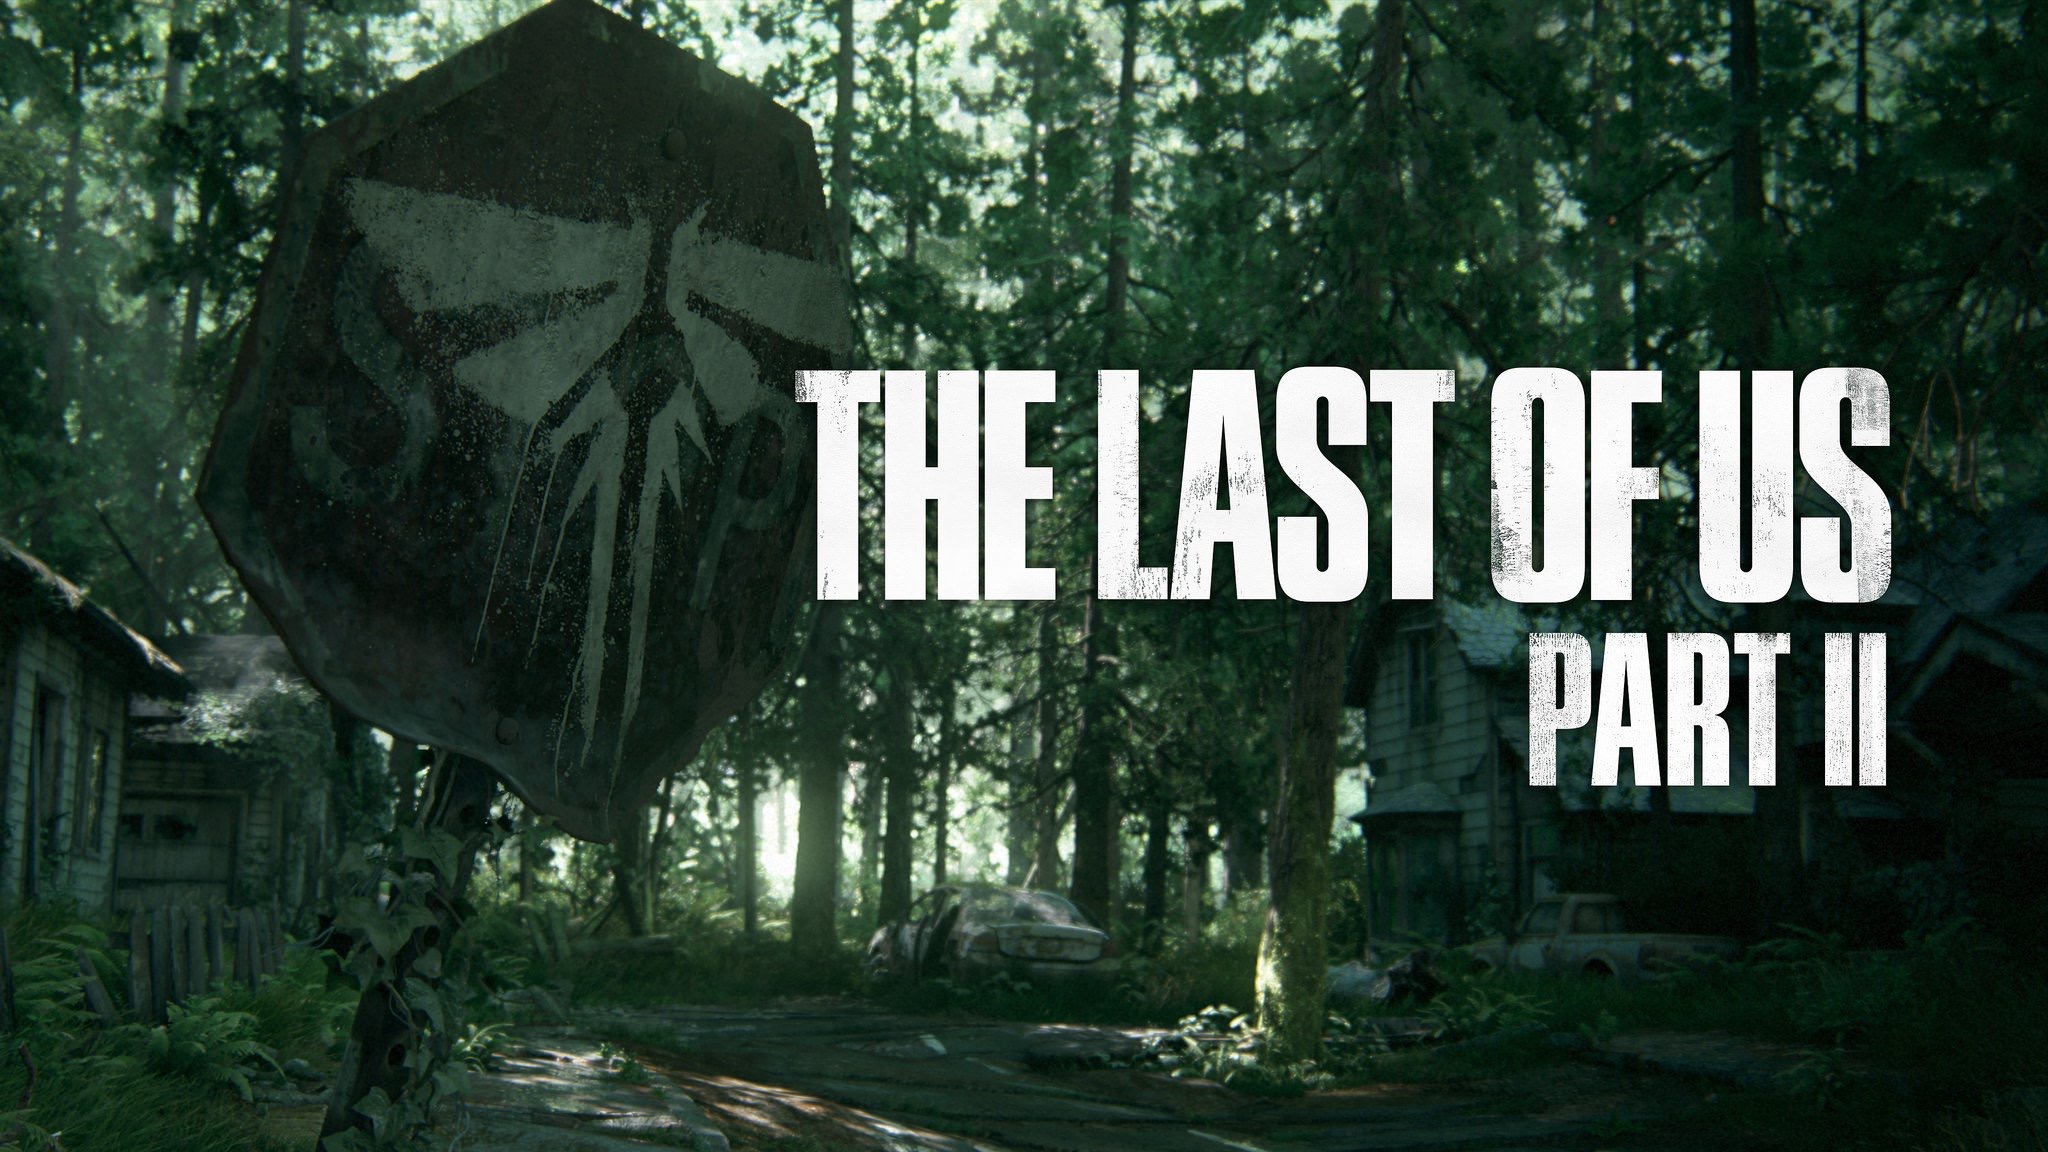 The Last of Us Part II announced at Sony’s PSX event